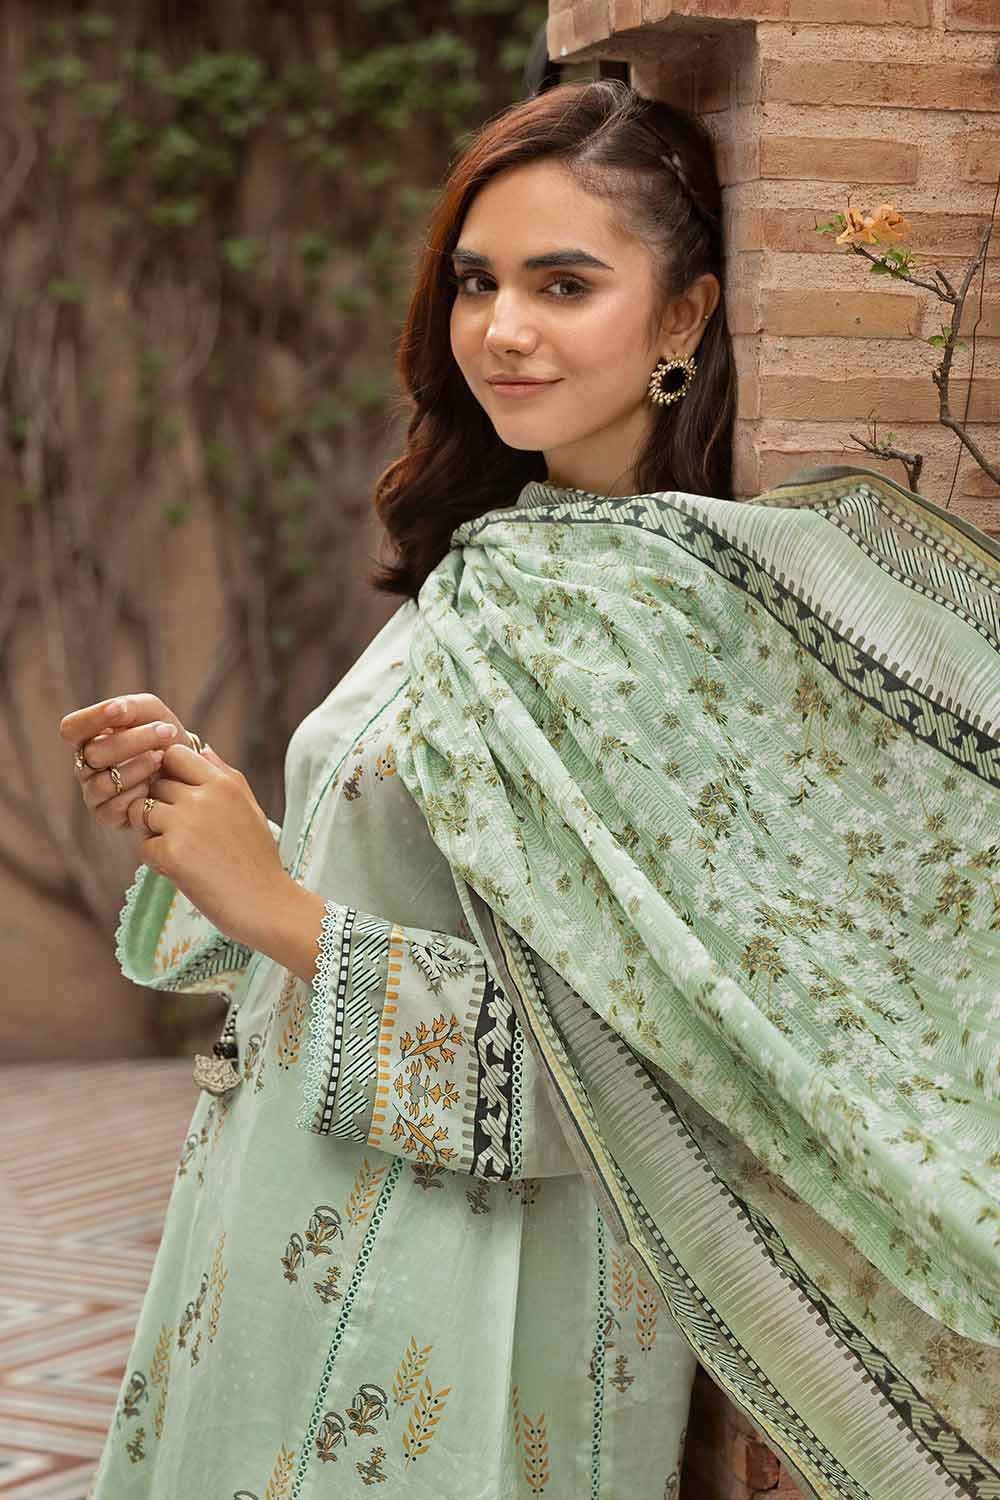 Gul Ahmed 3PC Printed Lawn Unstitched Suit CL-32443 A